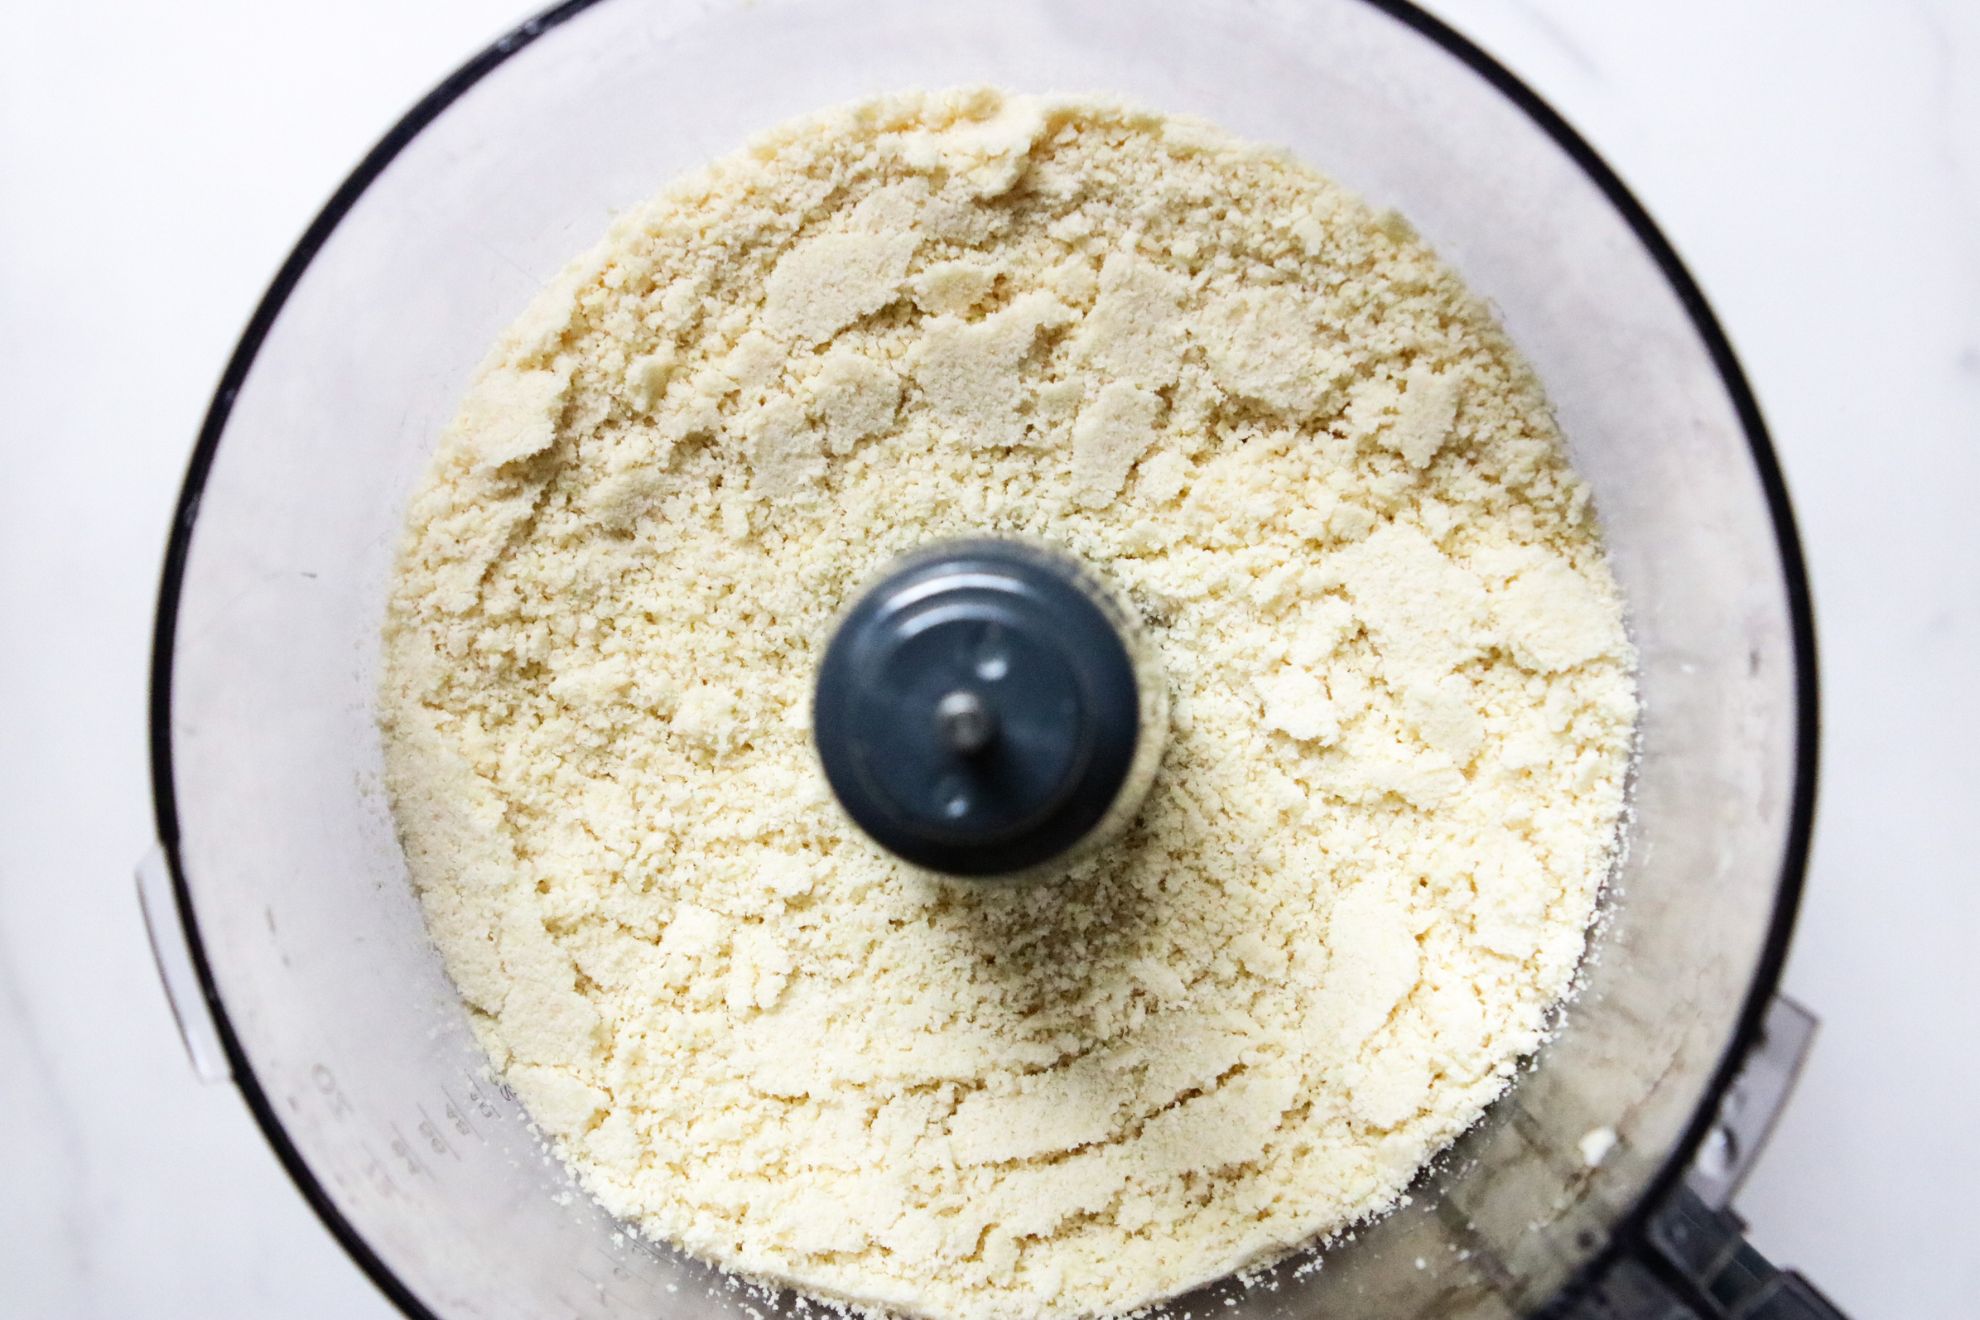 This is an overhead horizontal image of a food processor with blanched almond flour in it. The food processor sits on a white surface.